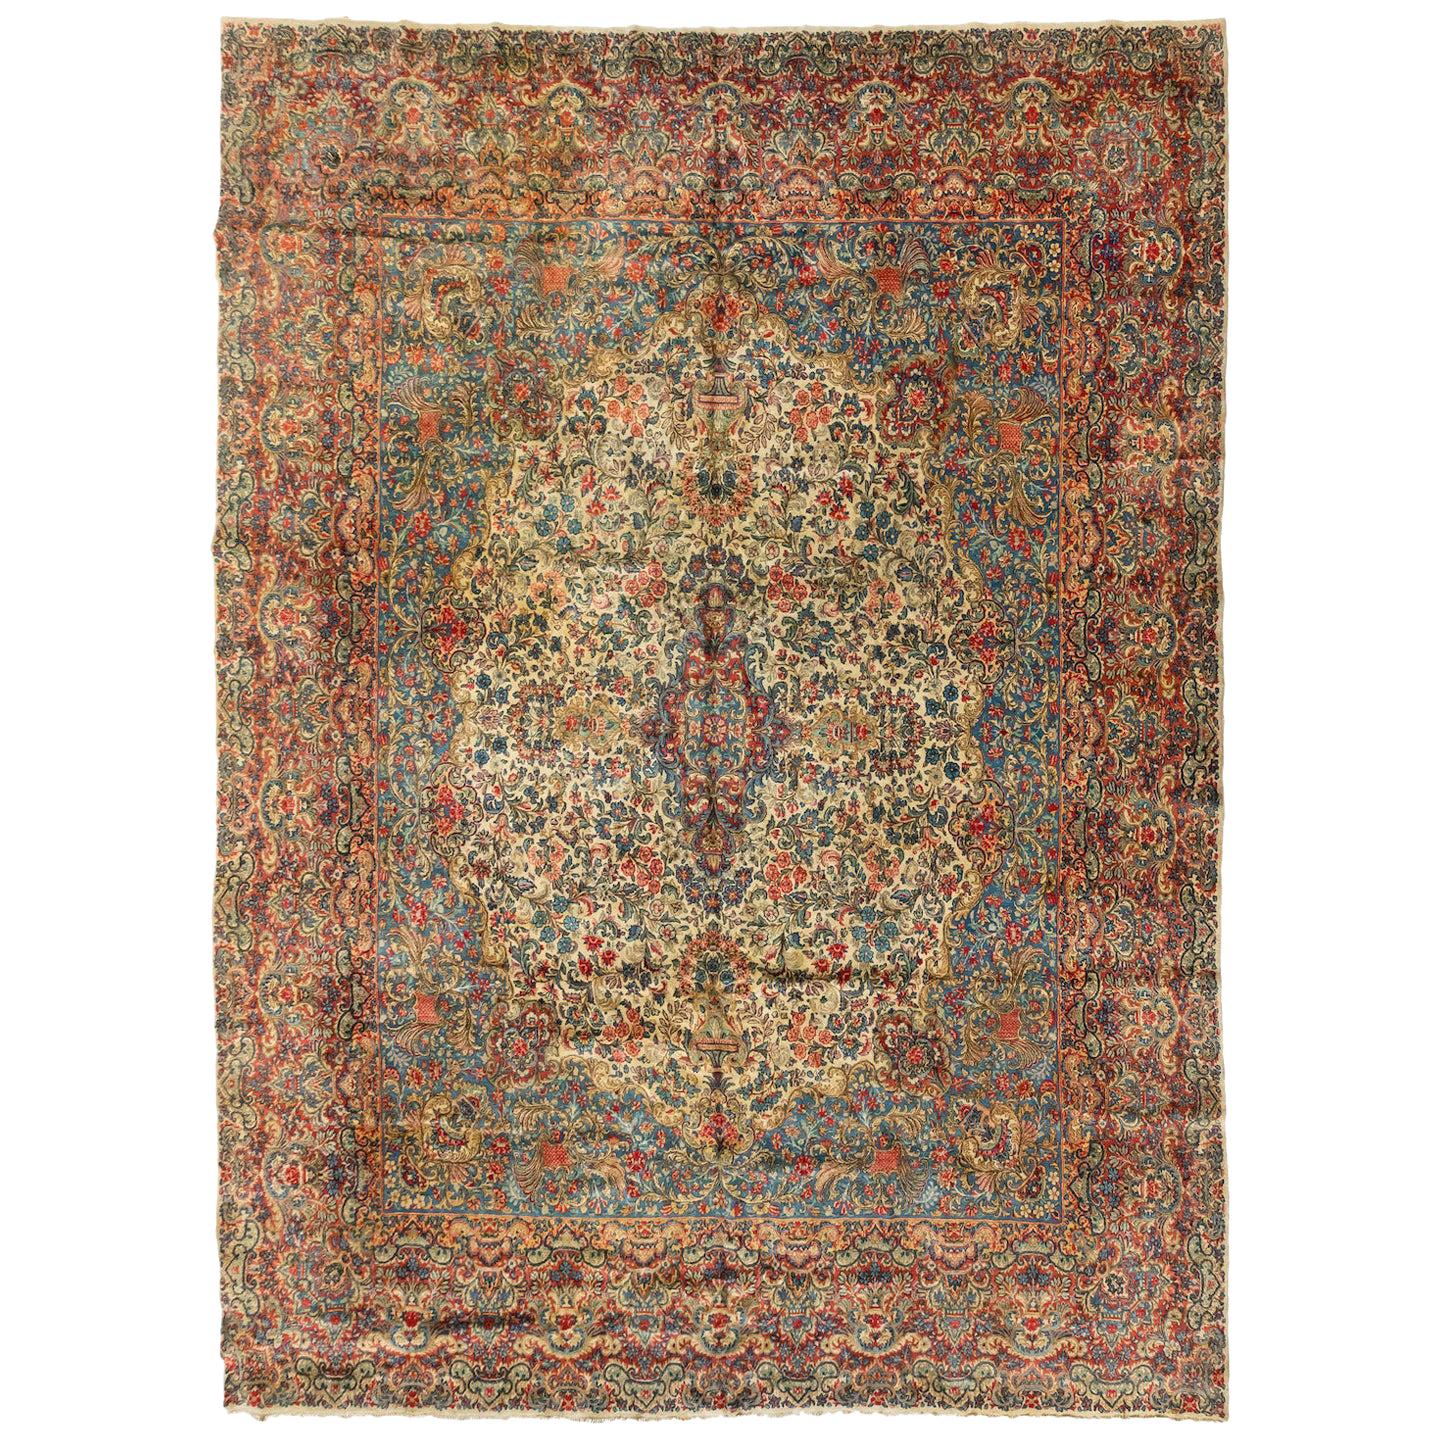 Oversize Antique Persian Ivory and Blue Floral Kirman Rug, circa 1920s